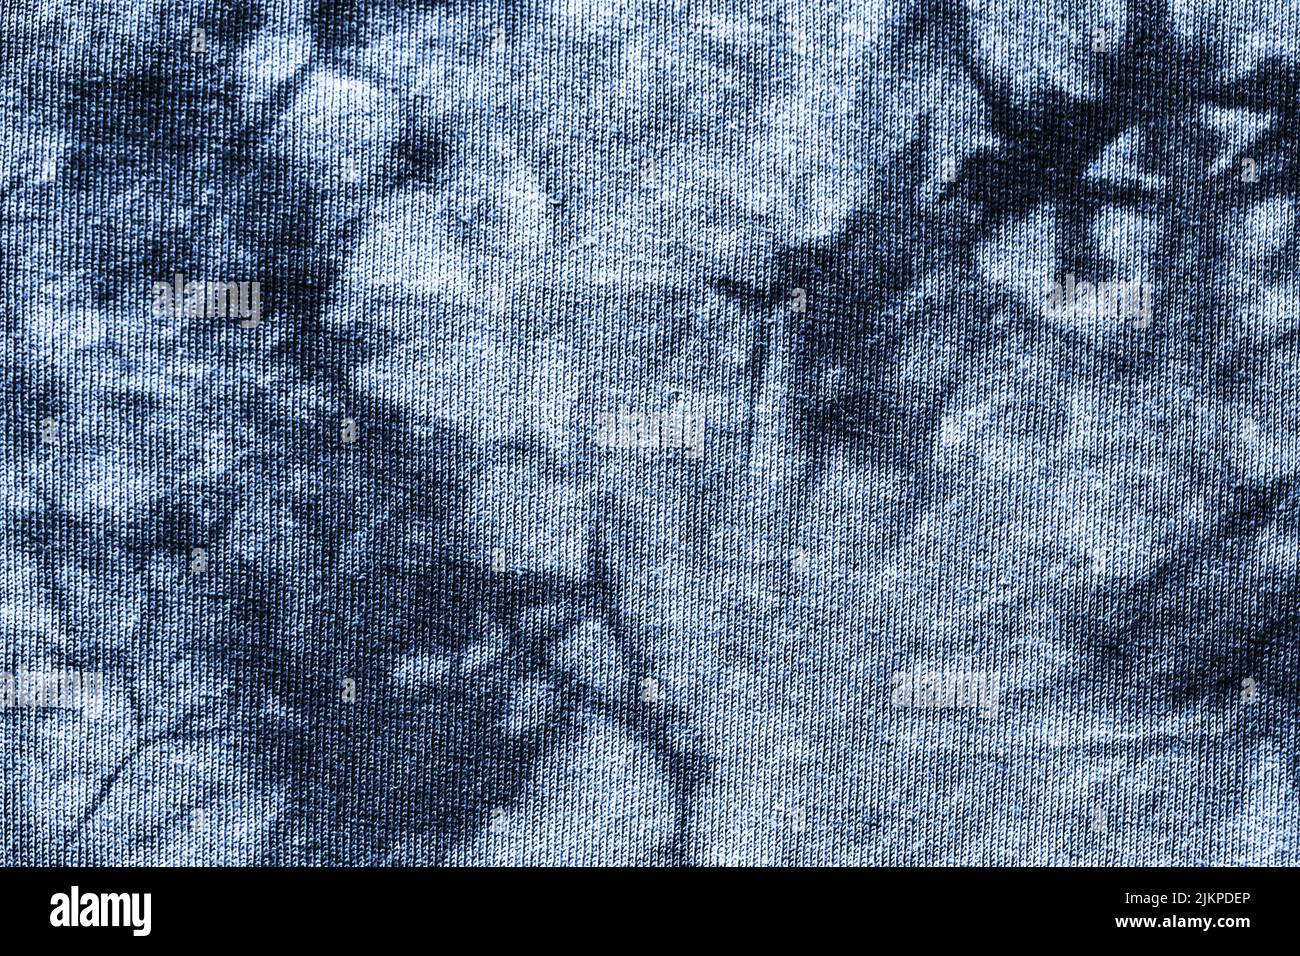 Monochrome deep blue tie-dye pattern, abstract fabric background photo texture Stock Photo